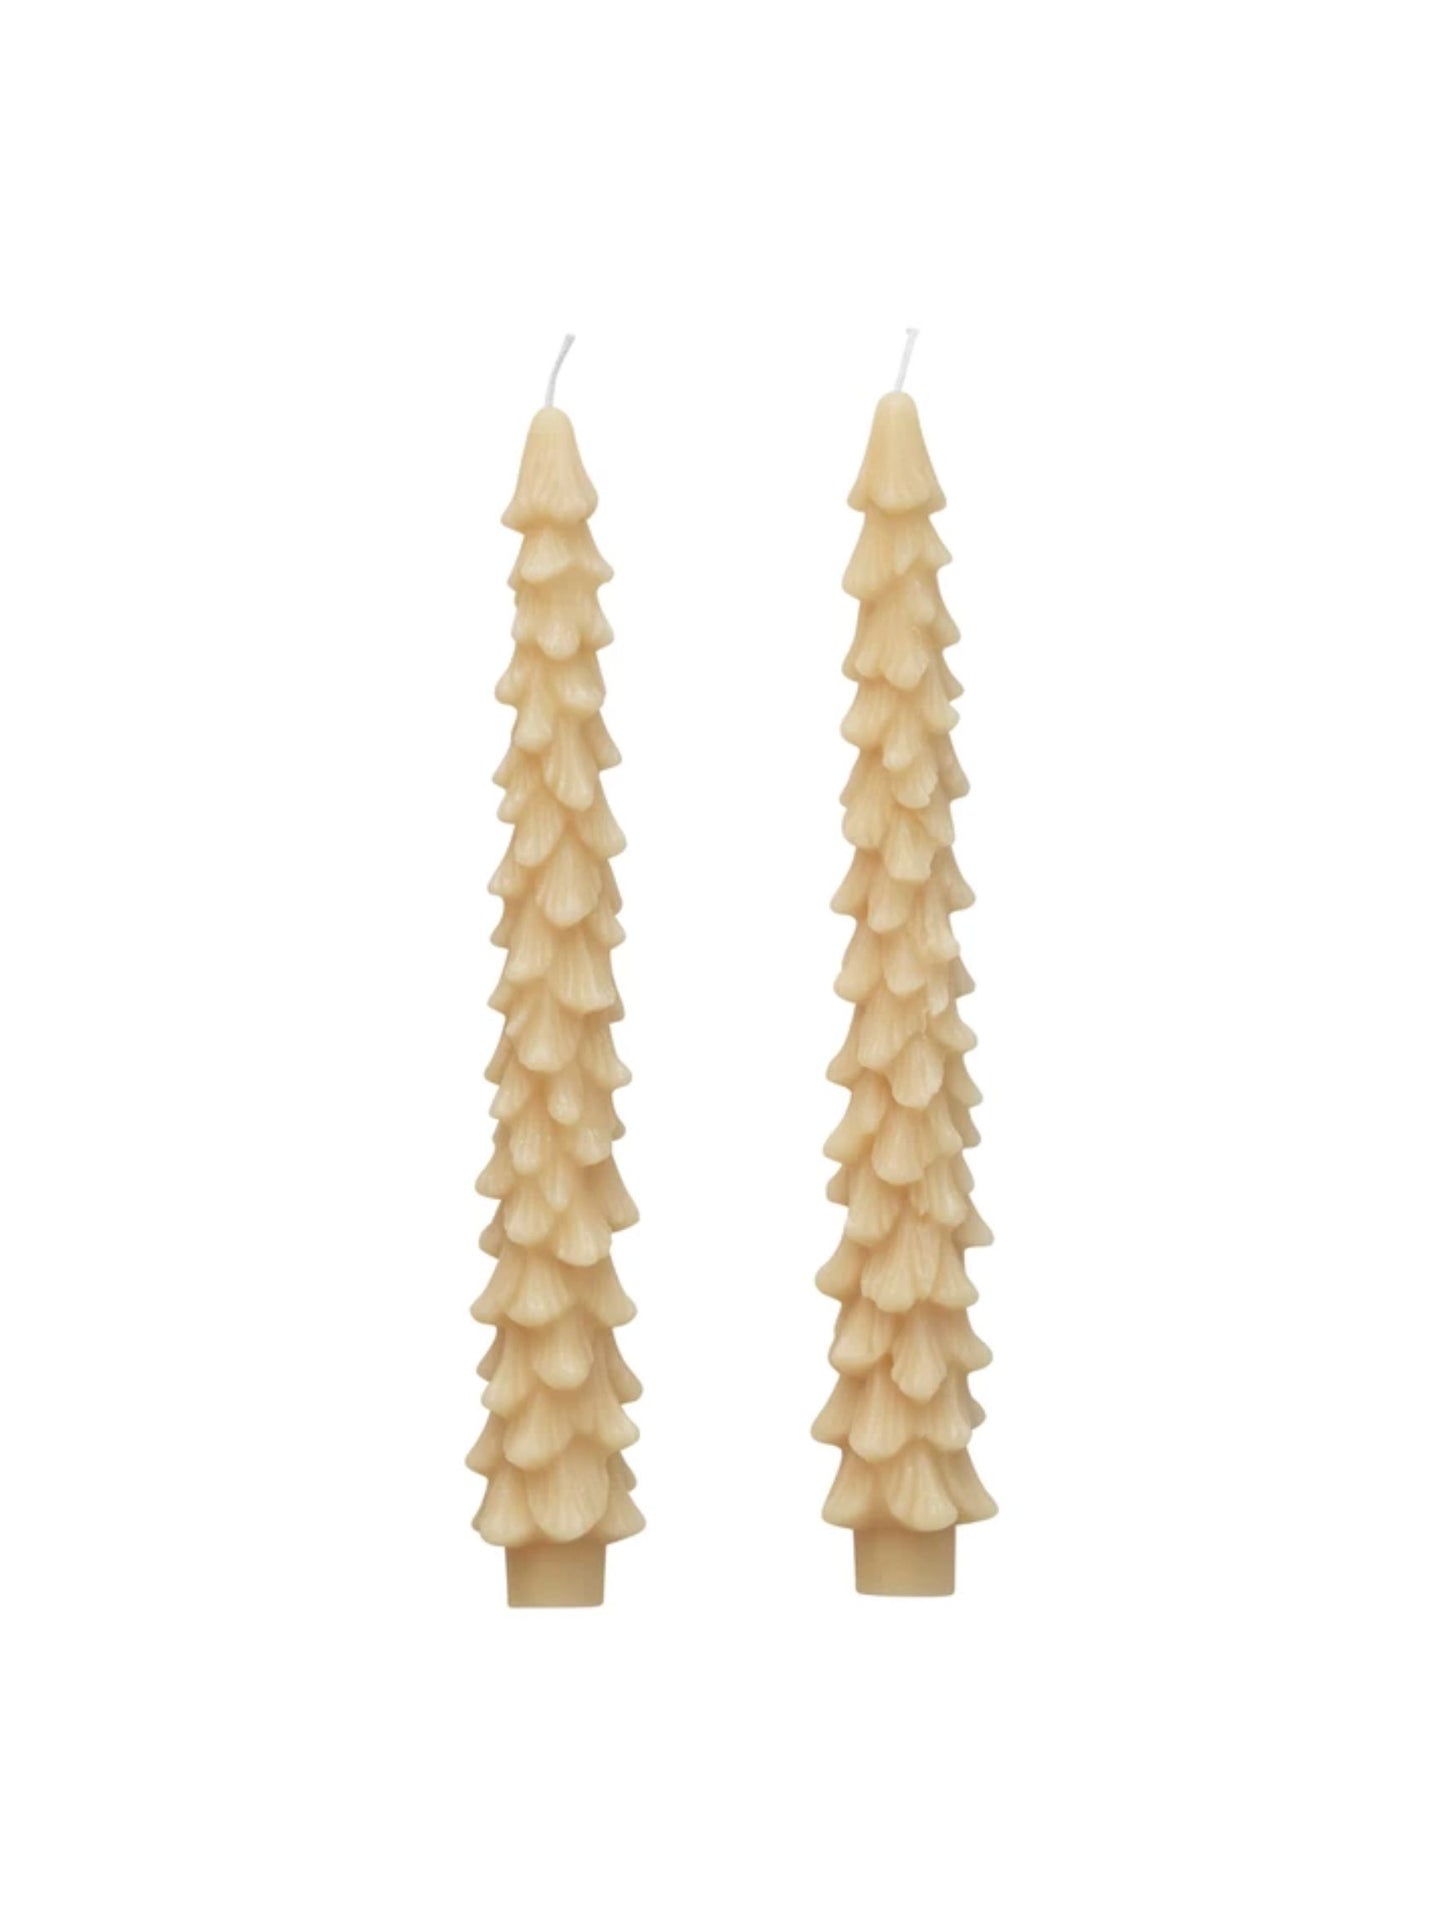 Cream Unscented Tree Shaped Taper Candles, Set of 2